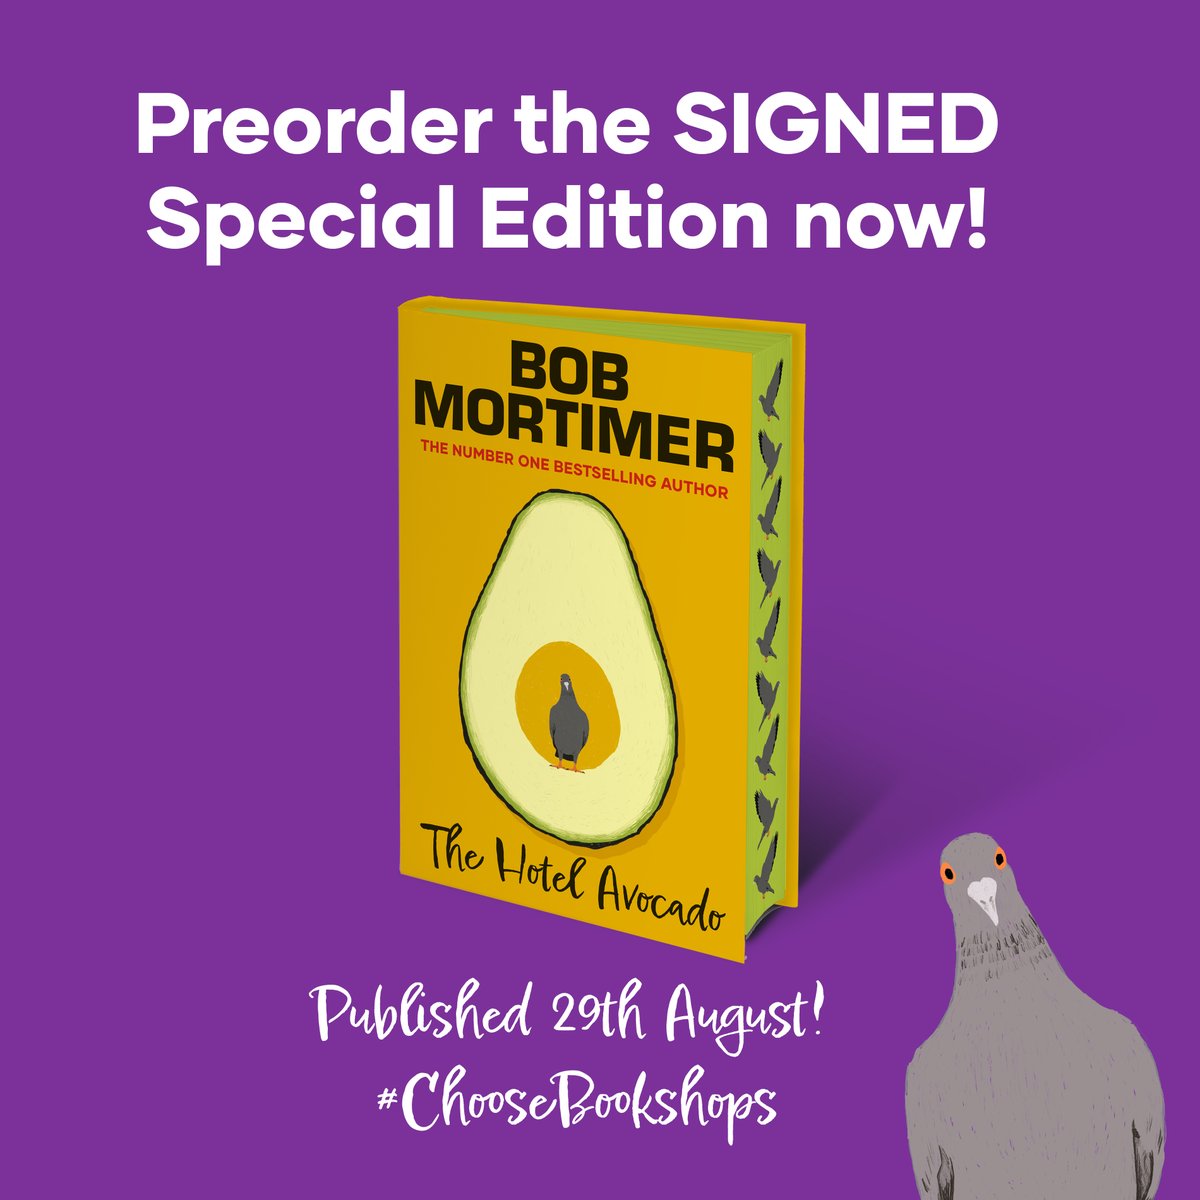 I'm thrilled to tell you that we'll be getting special SIGNED editions of The Hotel Avocado, the brand new novel by that lovely Bob Mortimer @RealBobMortimer. The book has special sprayed edges, adorned with pigeons! Pre-ORDER HERE! biggreenbookshop.com/signed-copies/…